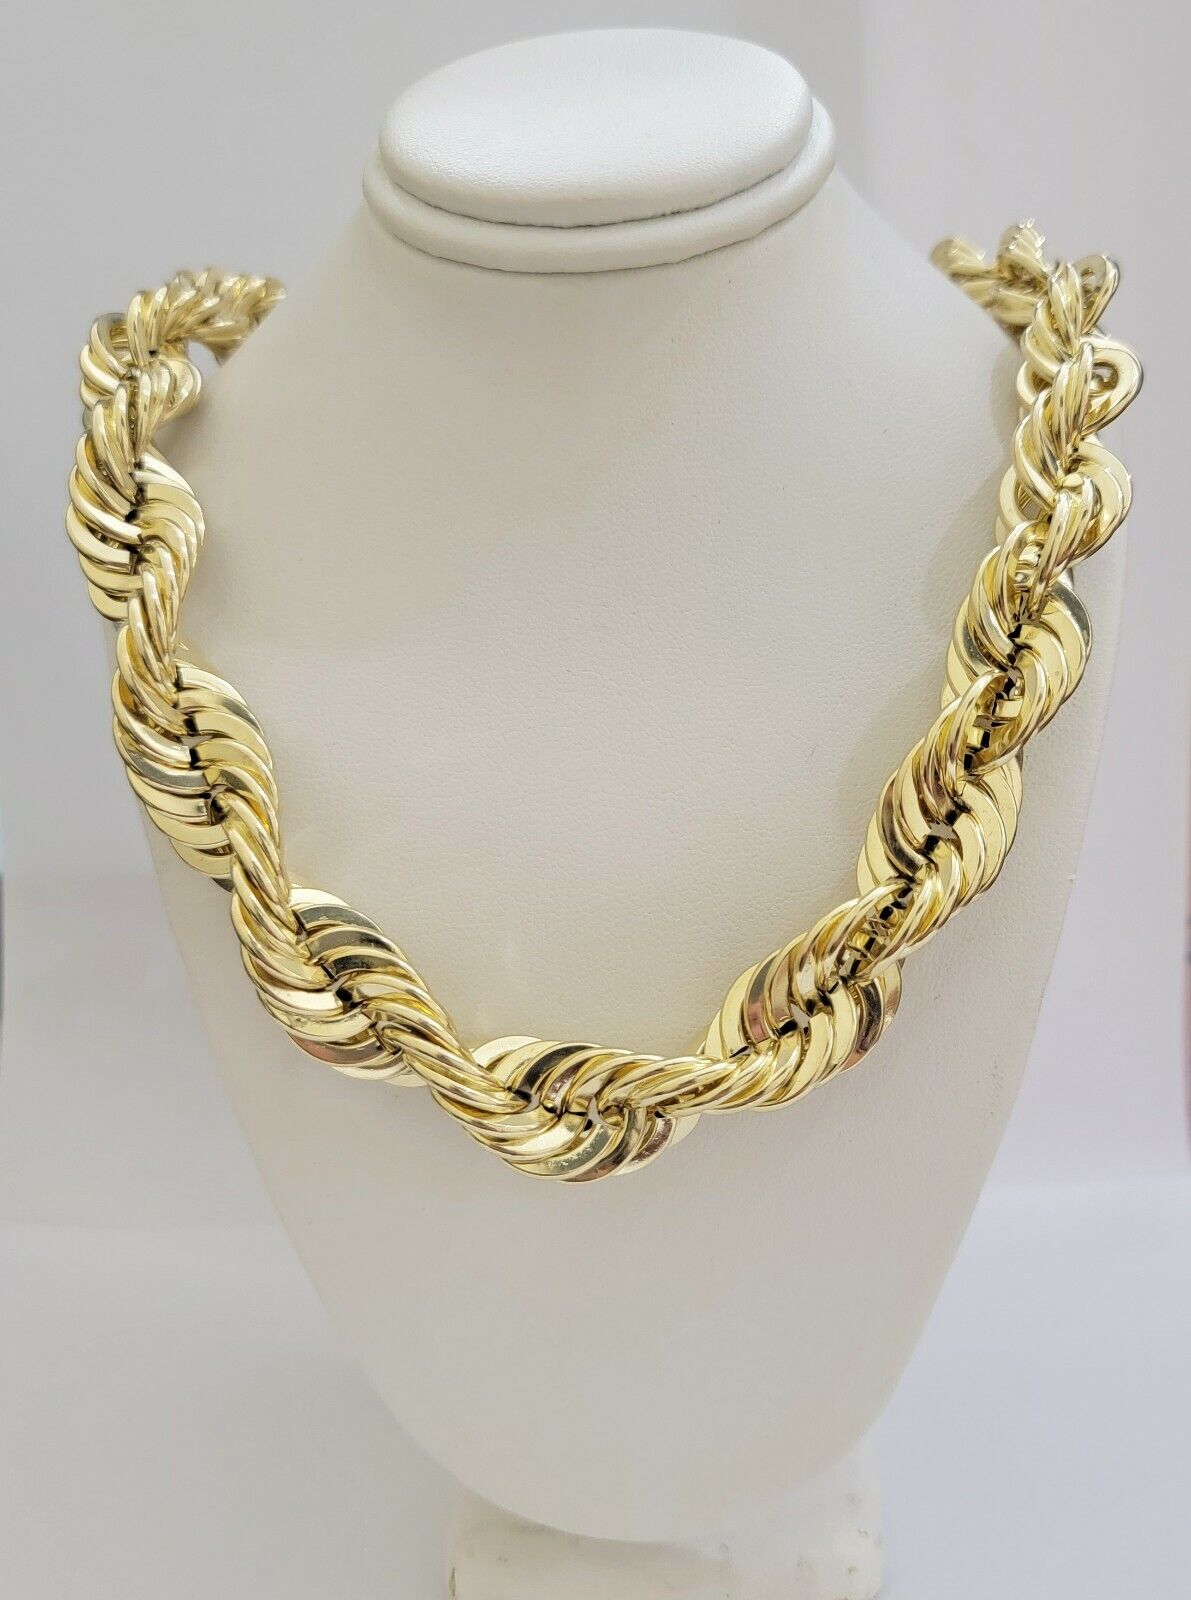 REAL 10k Gold Rope Chain Necklace 17mm Thick 20" Choker Diamond Cut 10kt 102 Grm